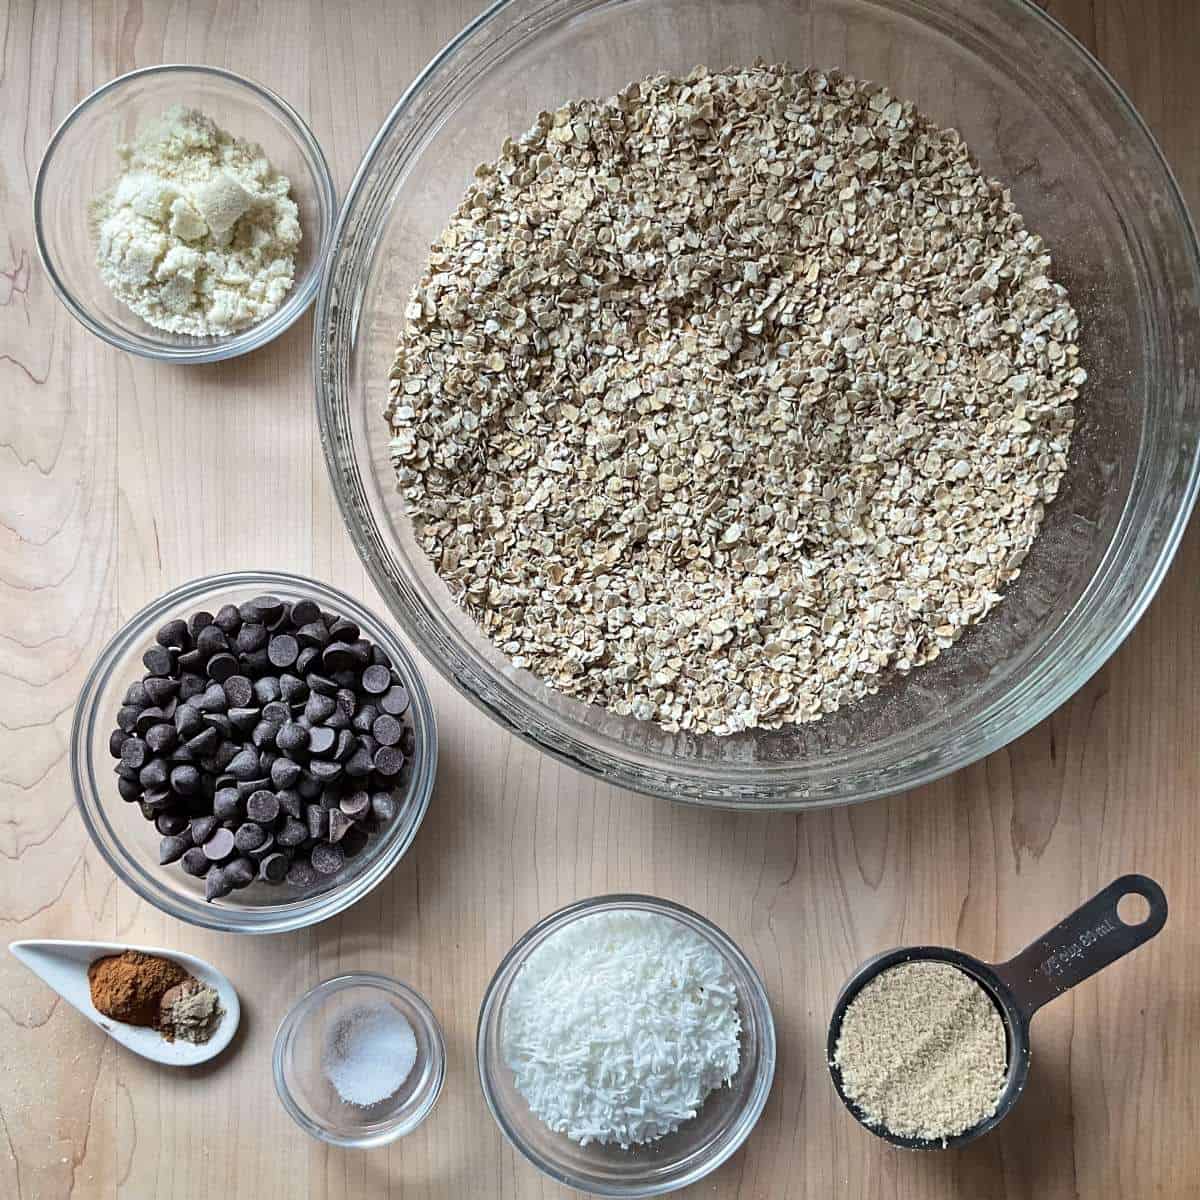 The dry ingredients to make a chewy granola bar recipe.